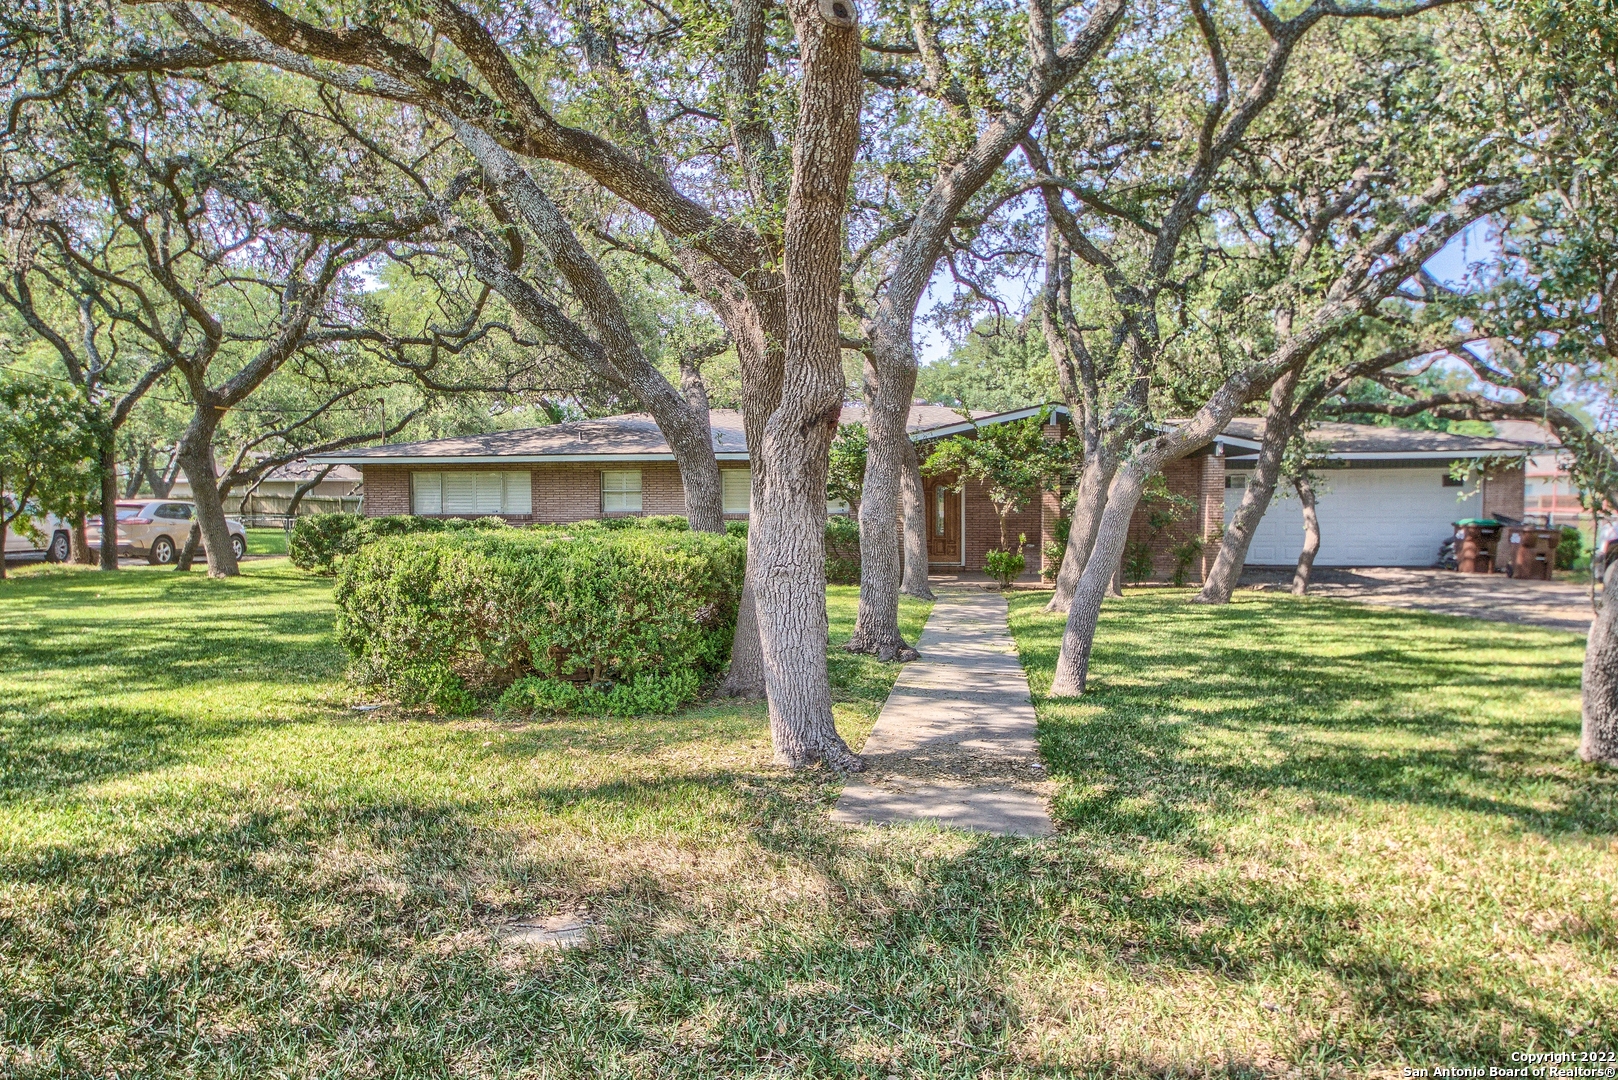 ENJOY YOUR SUCCESS in this elegant 3 bedroom, 2 bath one story. 1907 square feet is nestled beneath sprawling oaks in the popular HOLLYWOOD PARK. New carpet and paint, wonderfully wide porch and lots of built-ins.  Extra large garage and almost 1/2 acre (.44)! You're going to love it.  Move up now!